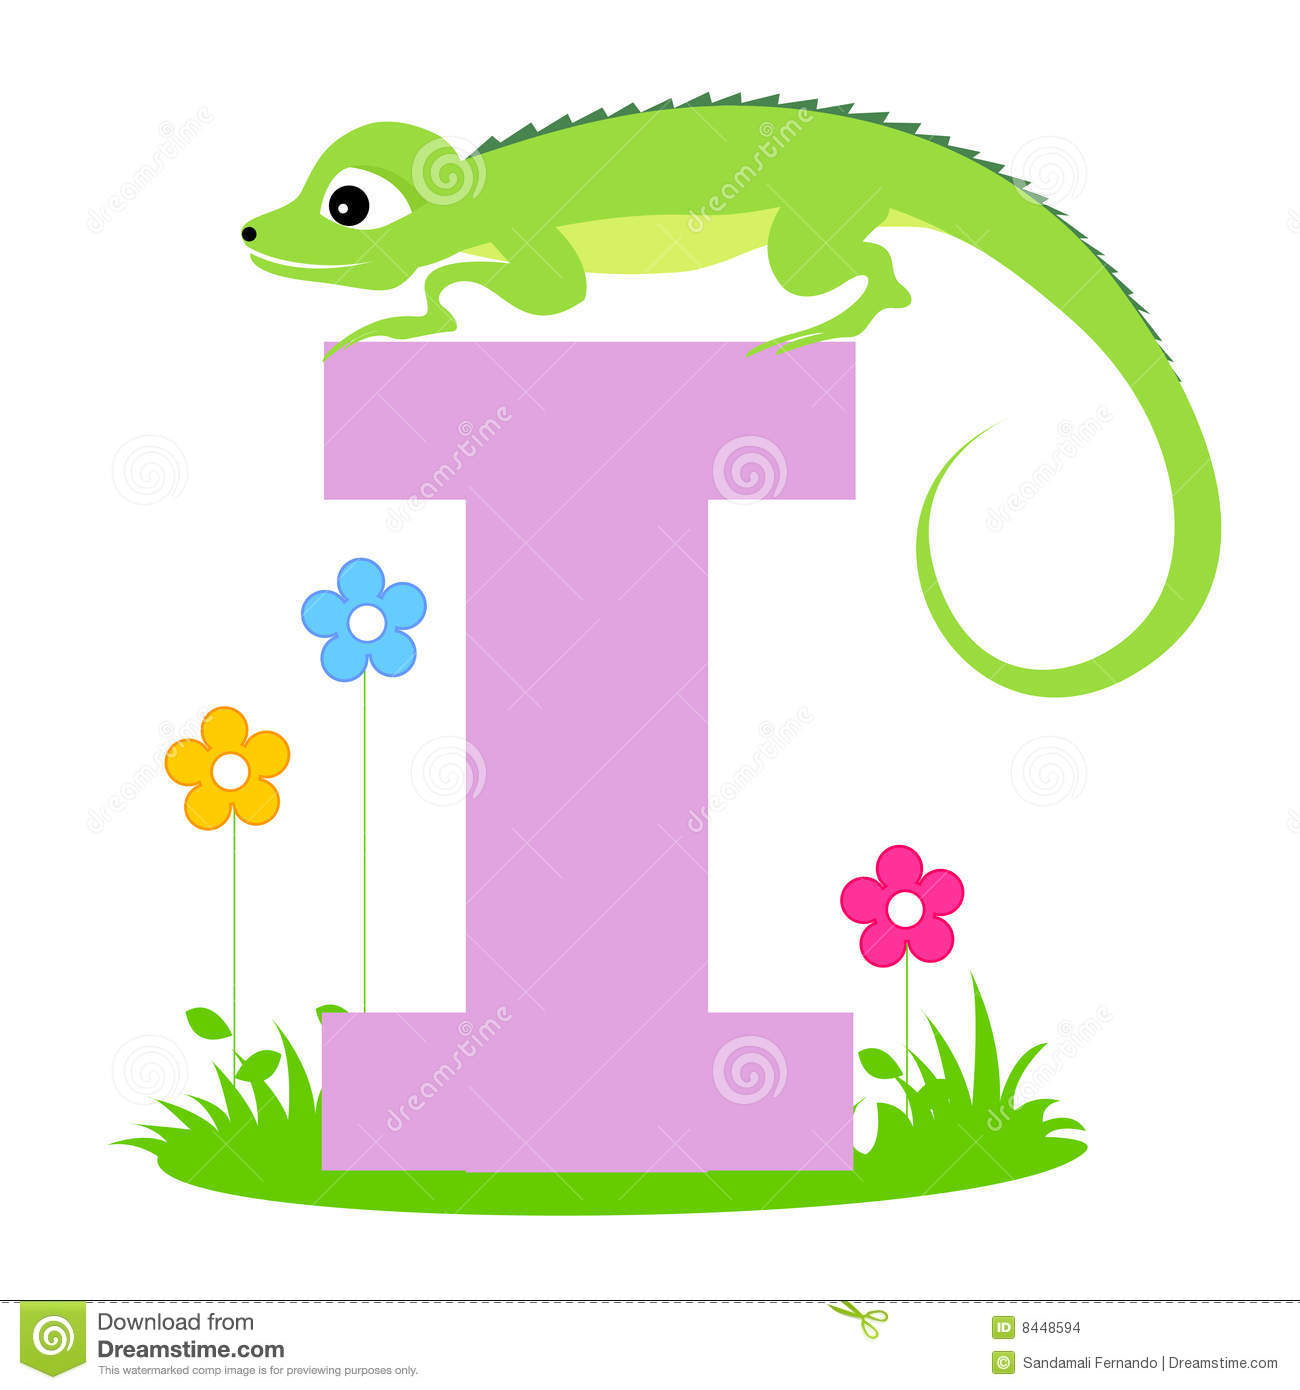 Illustration Of Alphabet Letter I With A Cute Little Iguana With